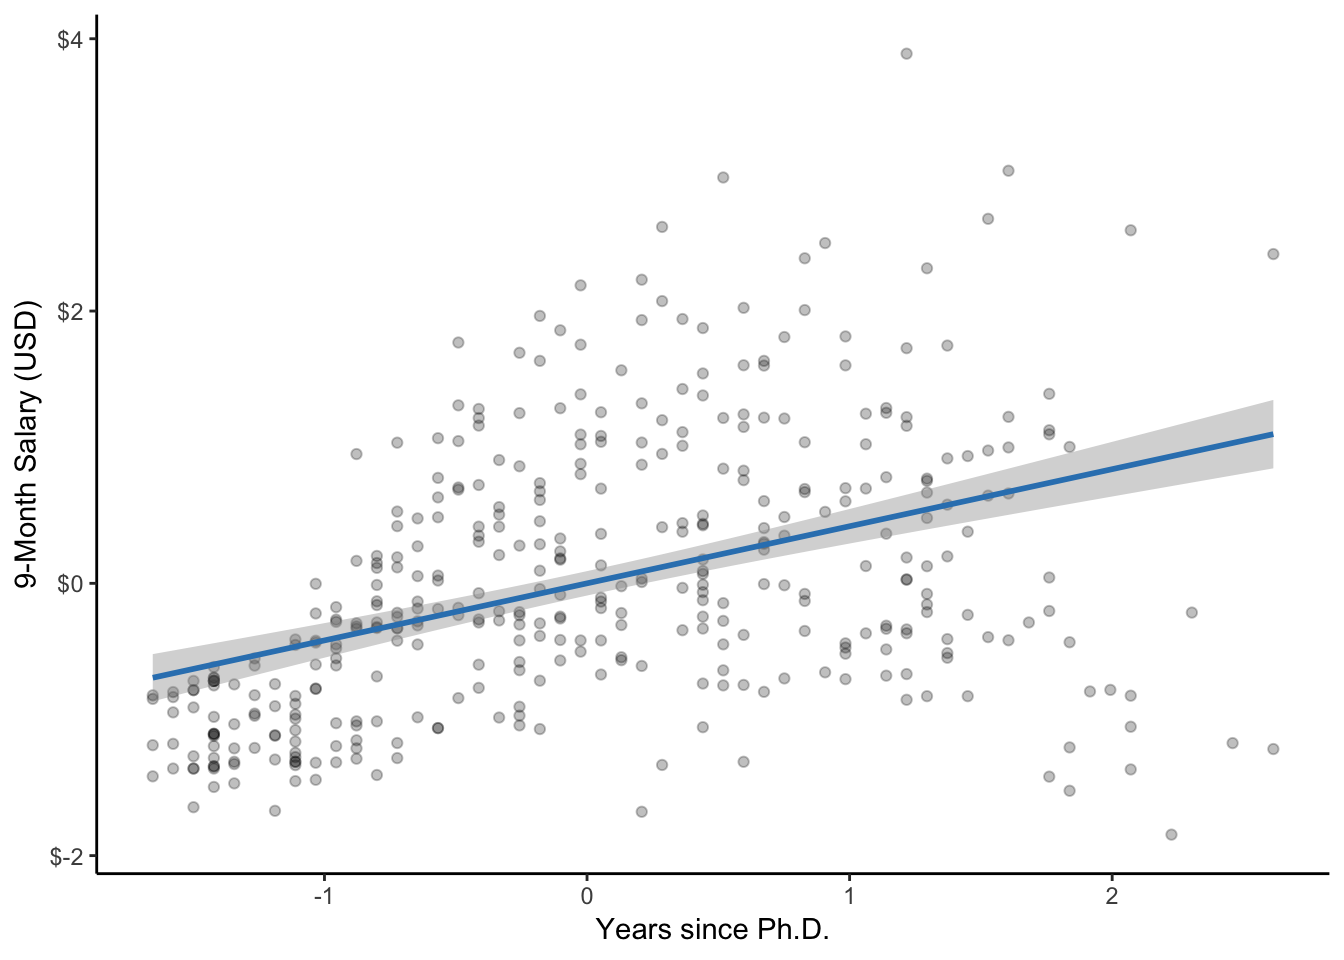 A scatterplot of years since Ph.D. and salary along with the line of best fit. The gray band represents the 95% CI.